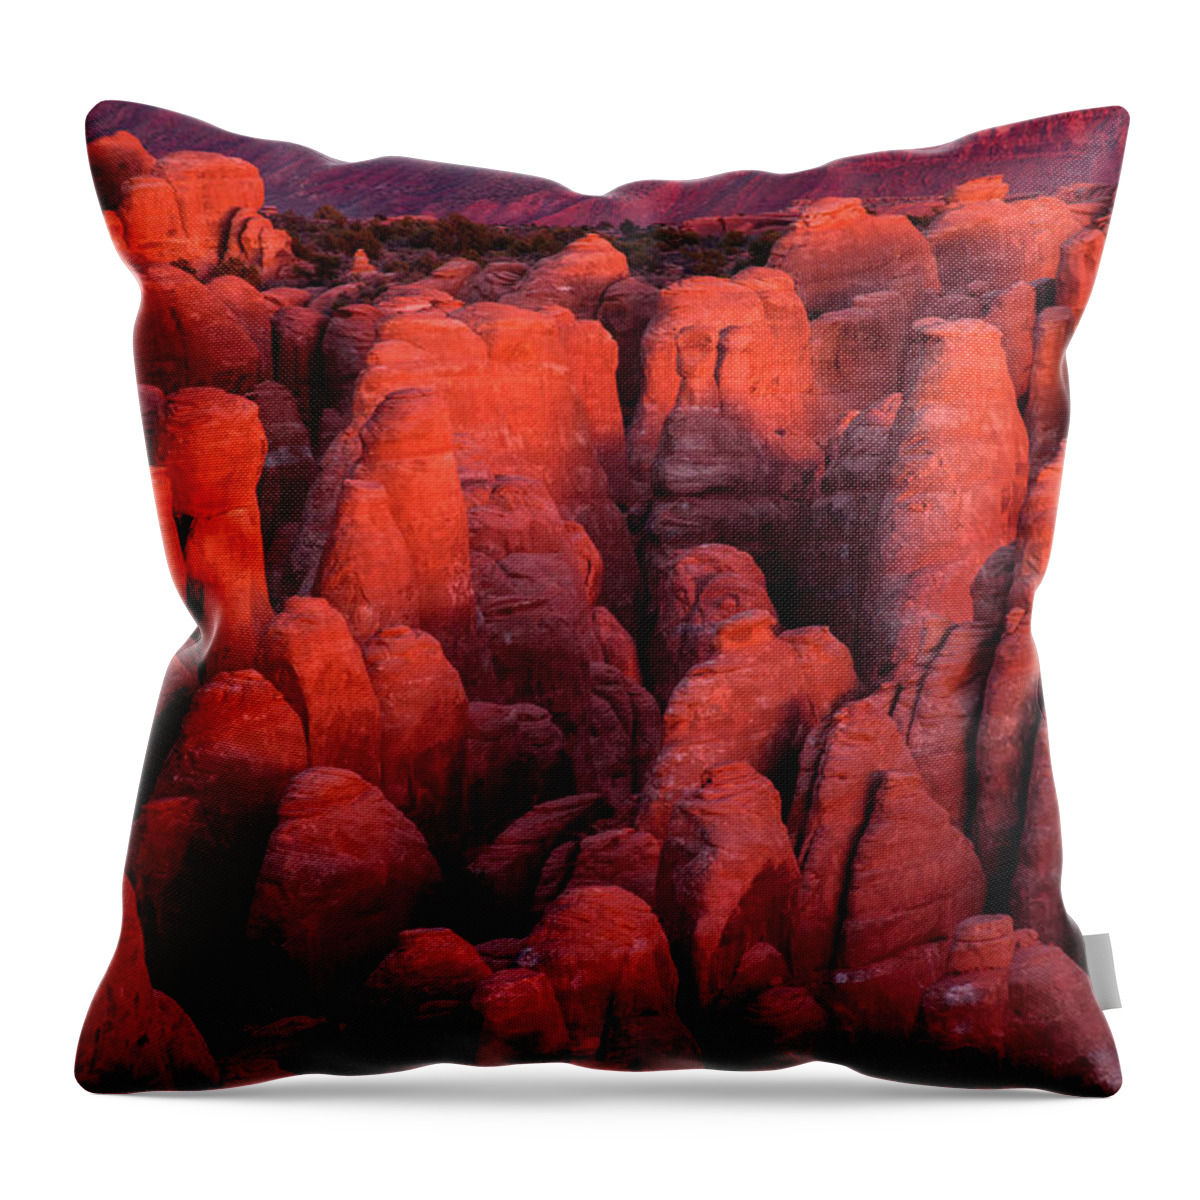 Utah Throw Pillow featuring the photograph Fiery Furnace by Dustin LeFevre